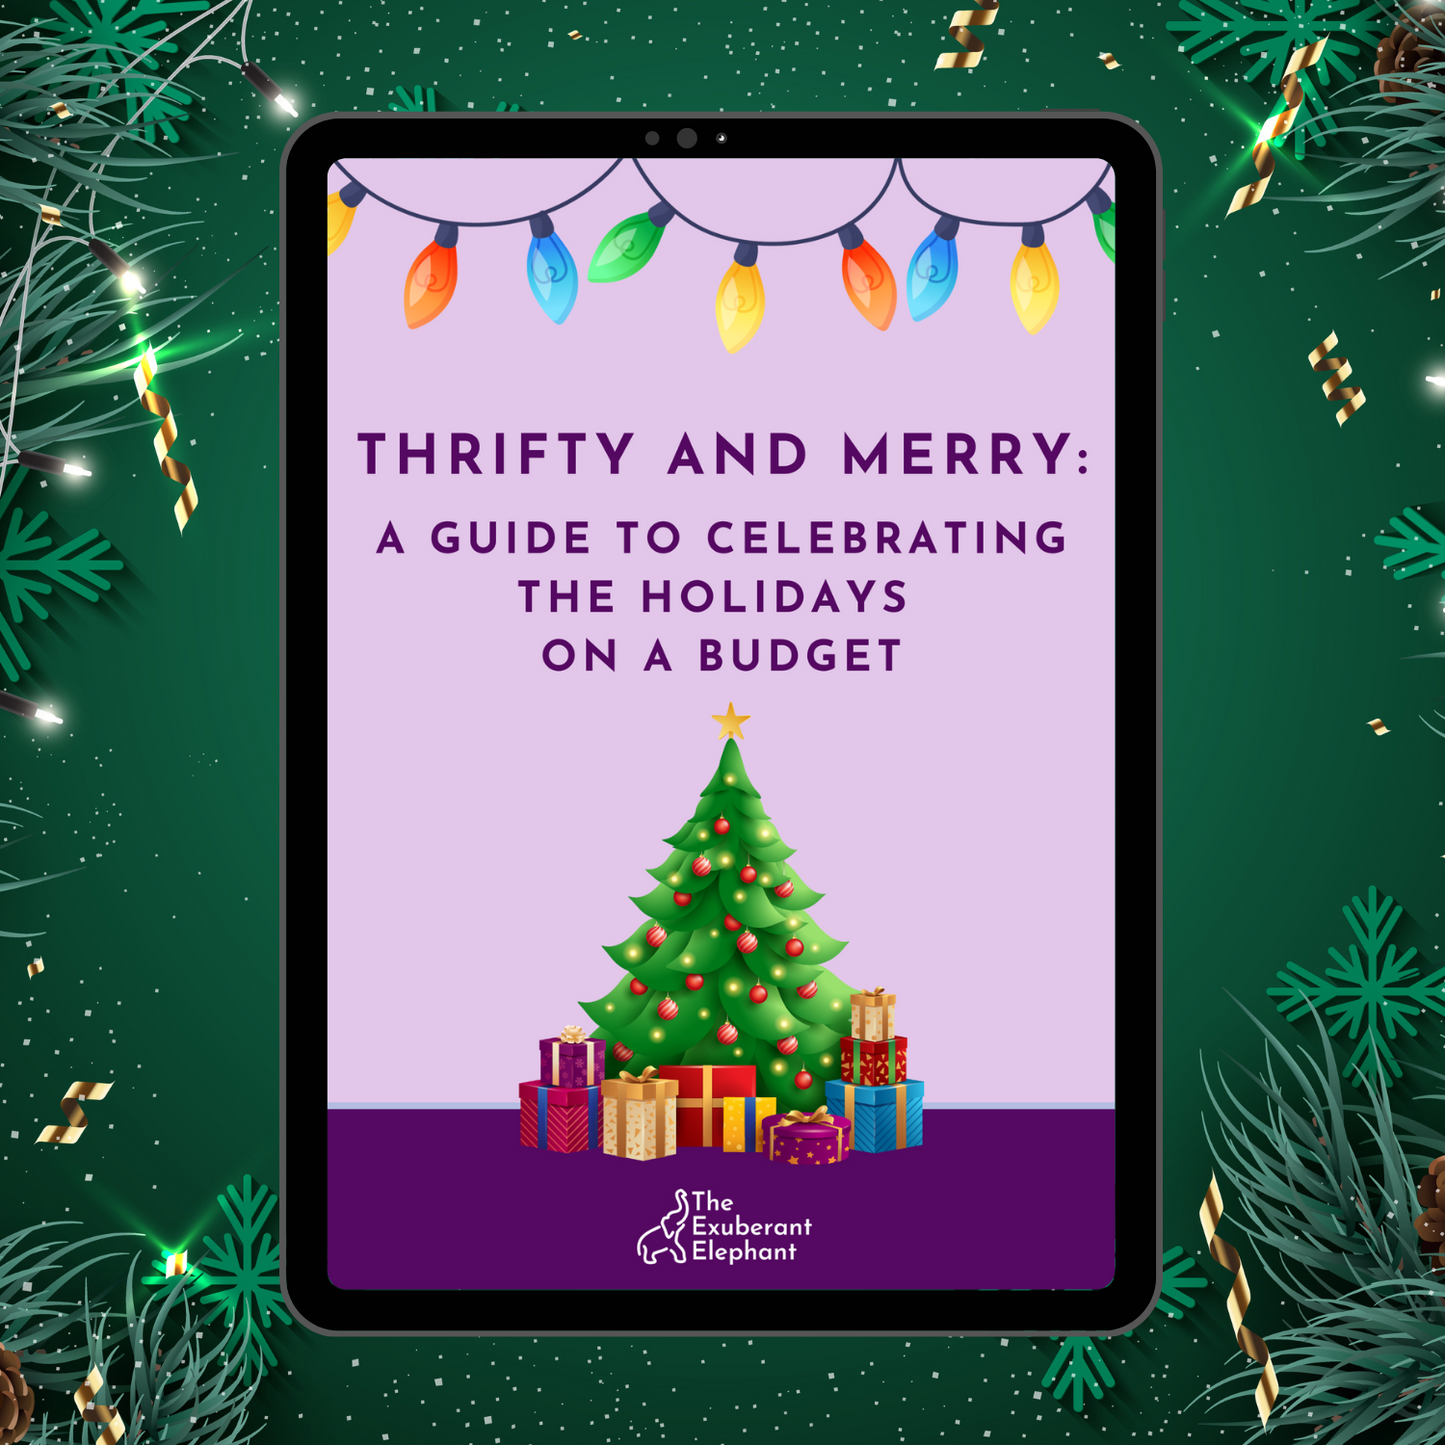 Thrifty and Merry: A Guide to Celebrating the Holidays on a Budget